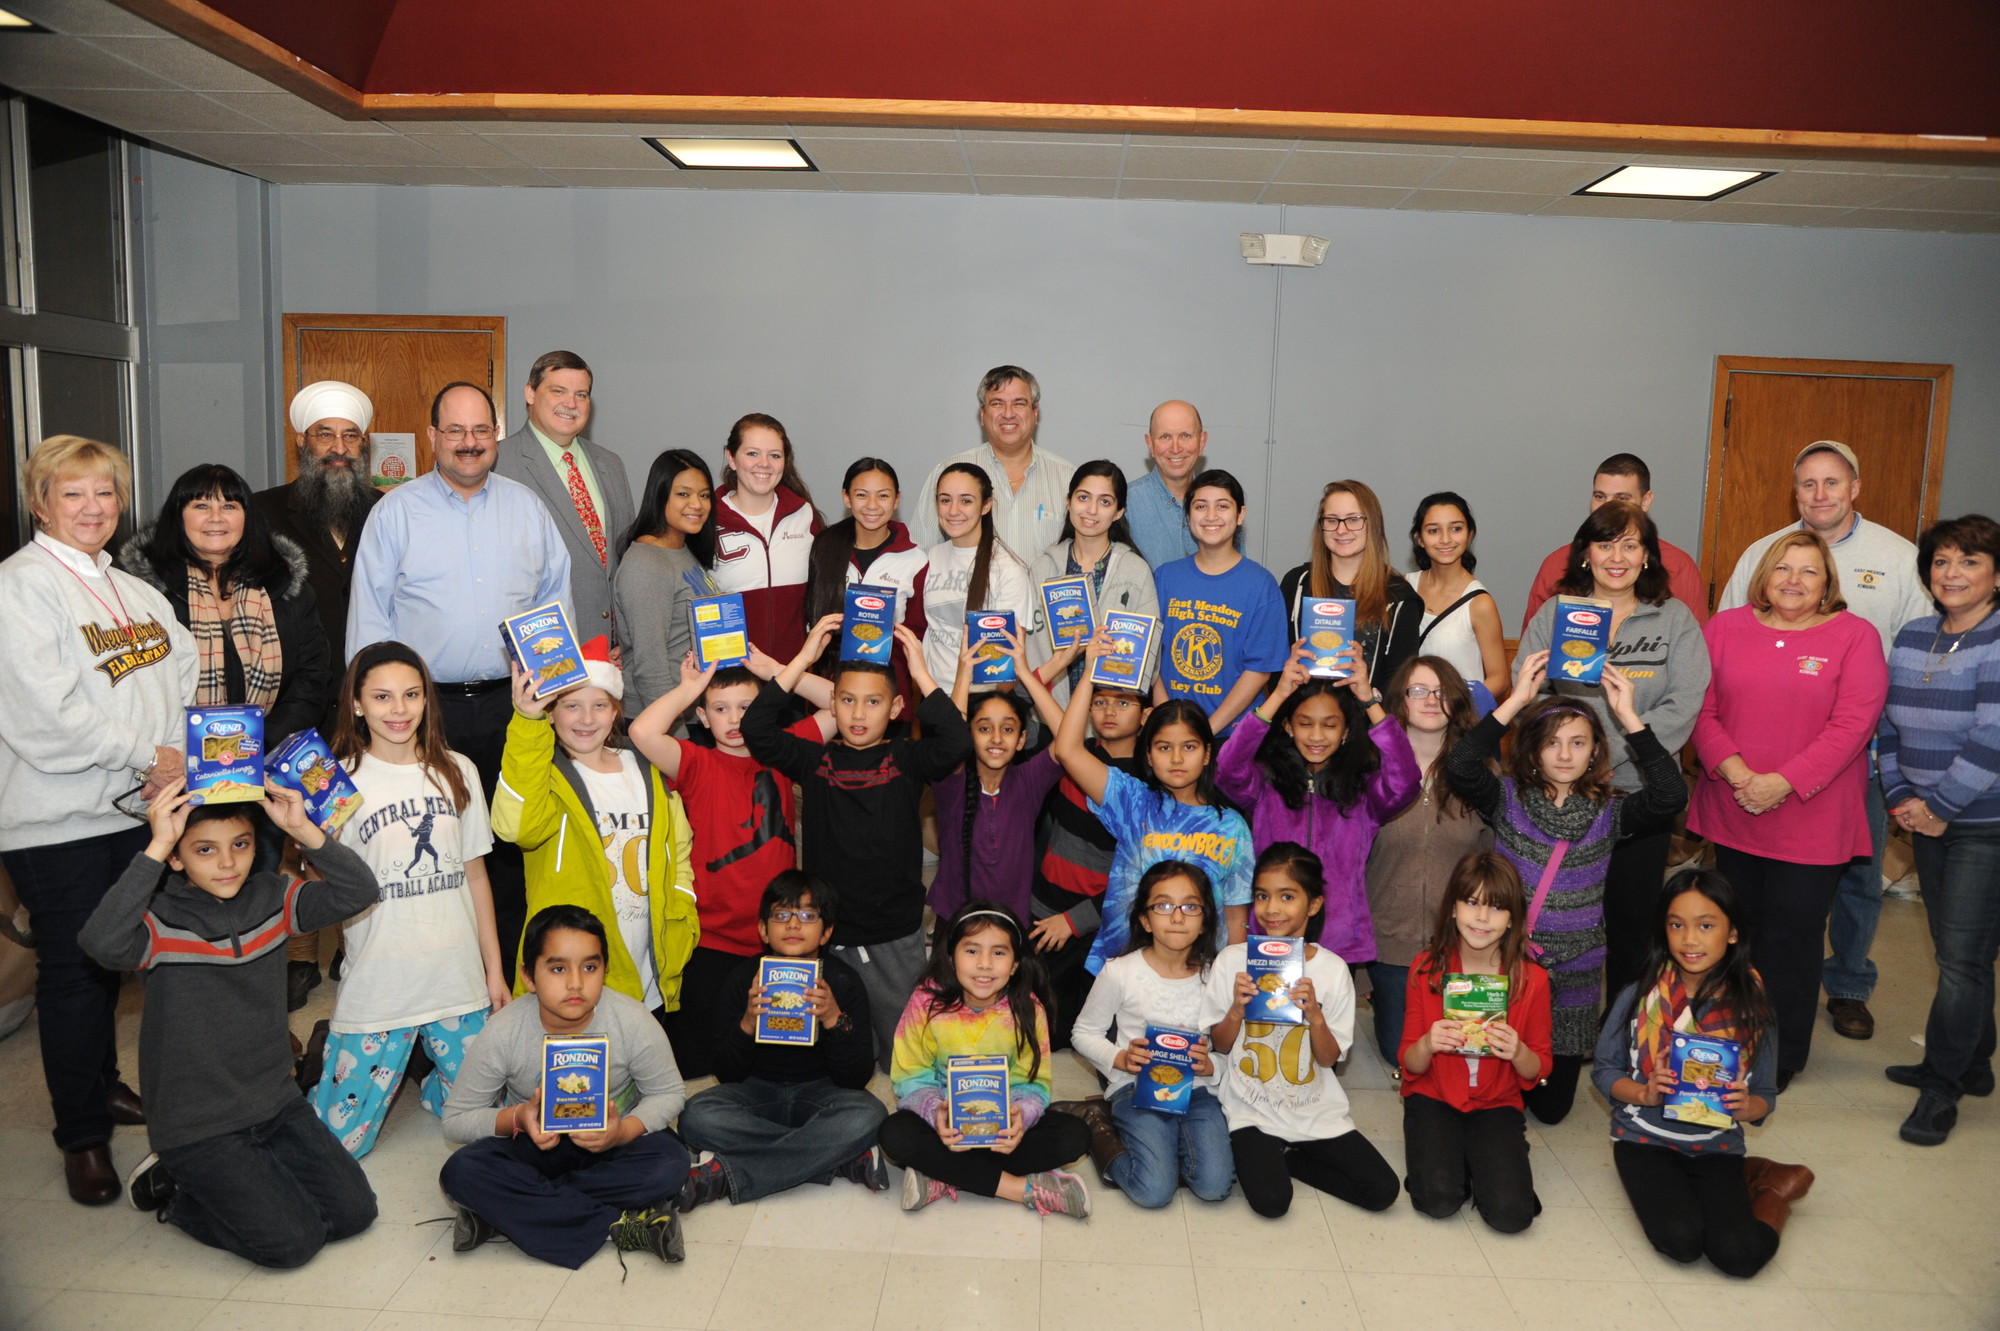 East Meadow Kiwanis club members and students sorted food last Friday that was accumulated in food drives the club hosted outside local supermarkets.